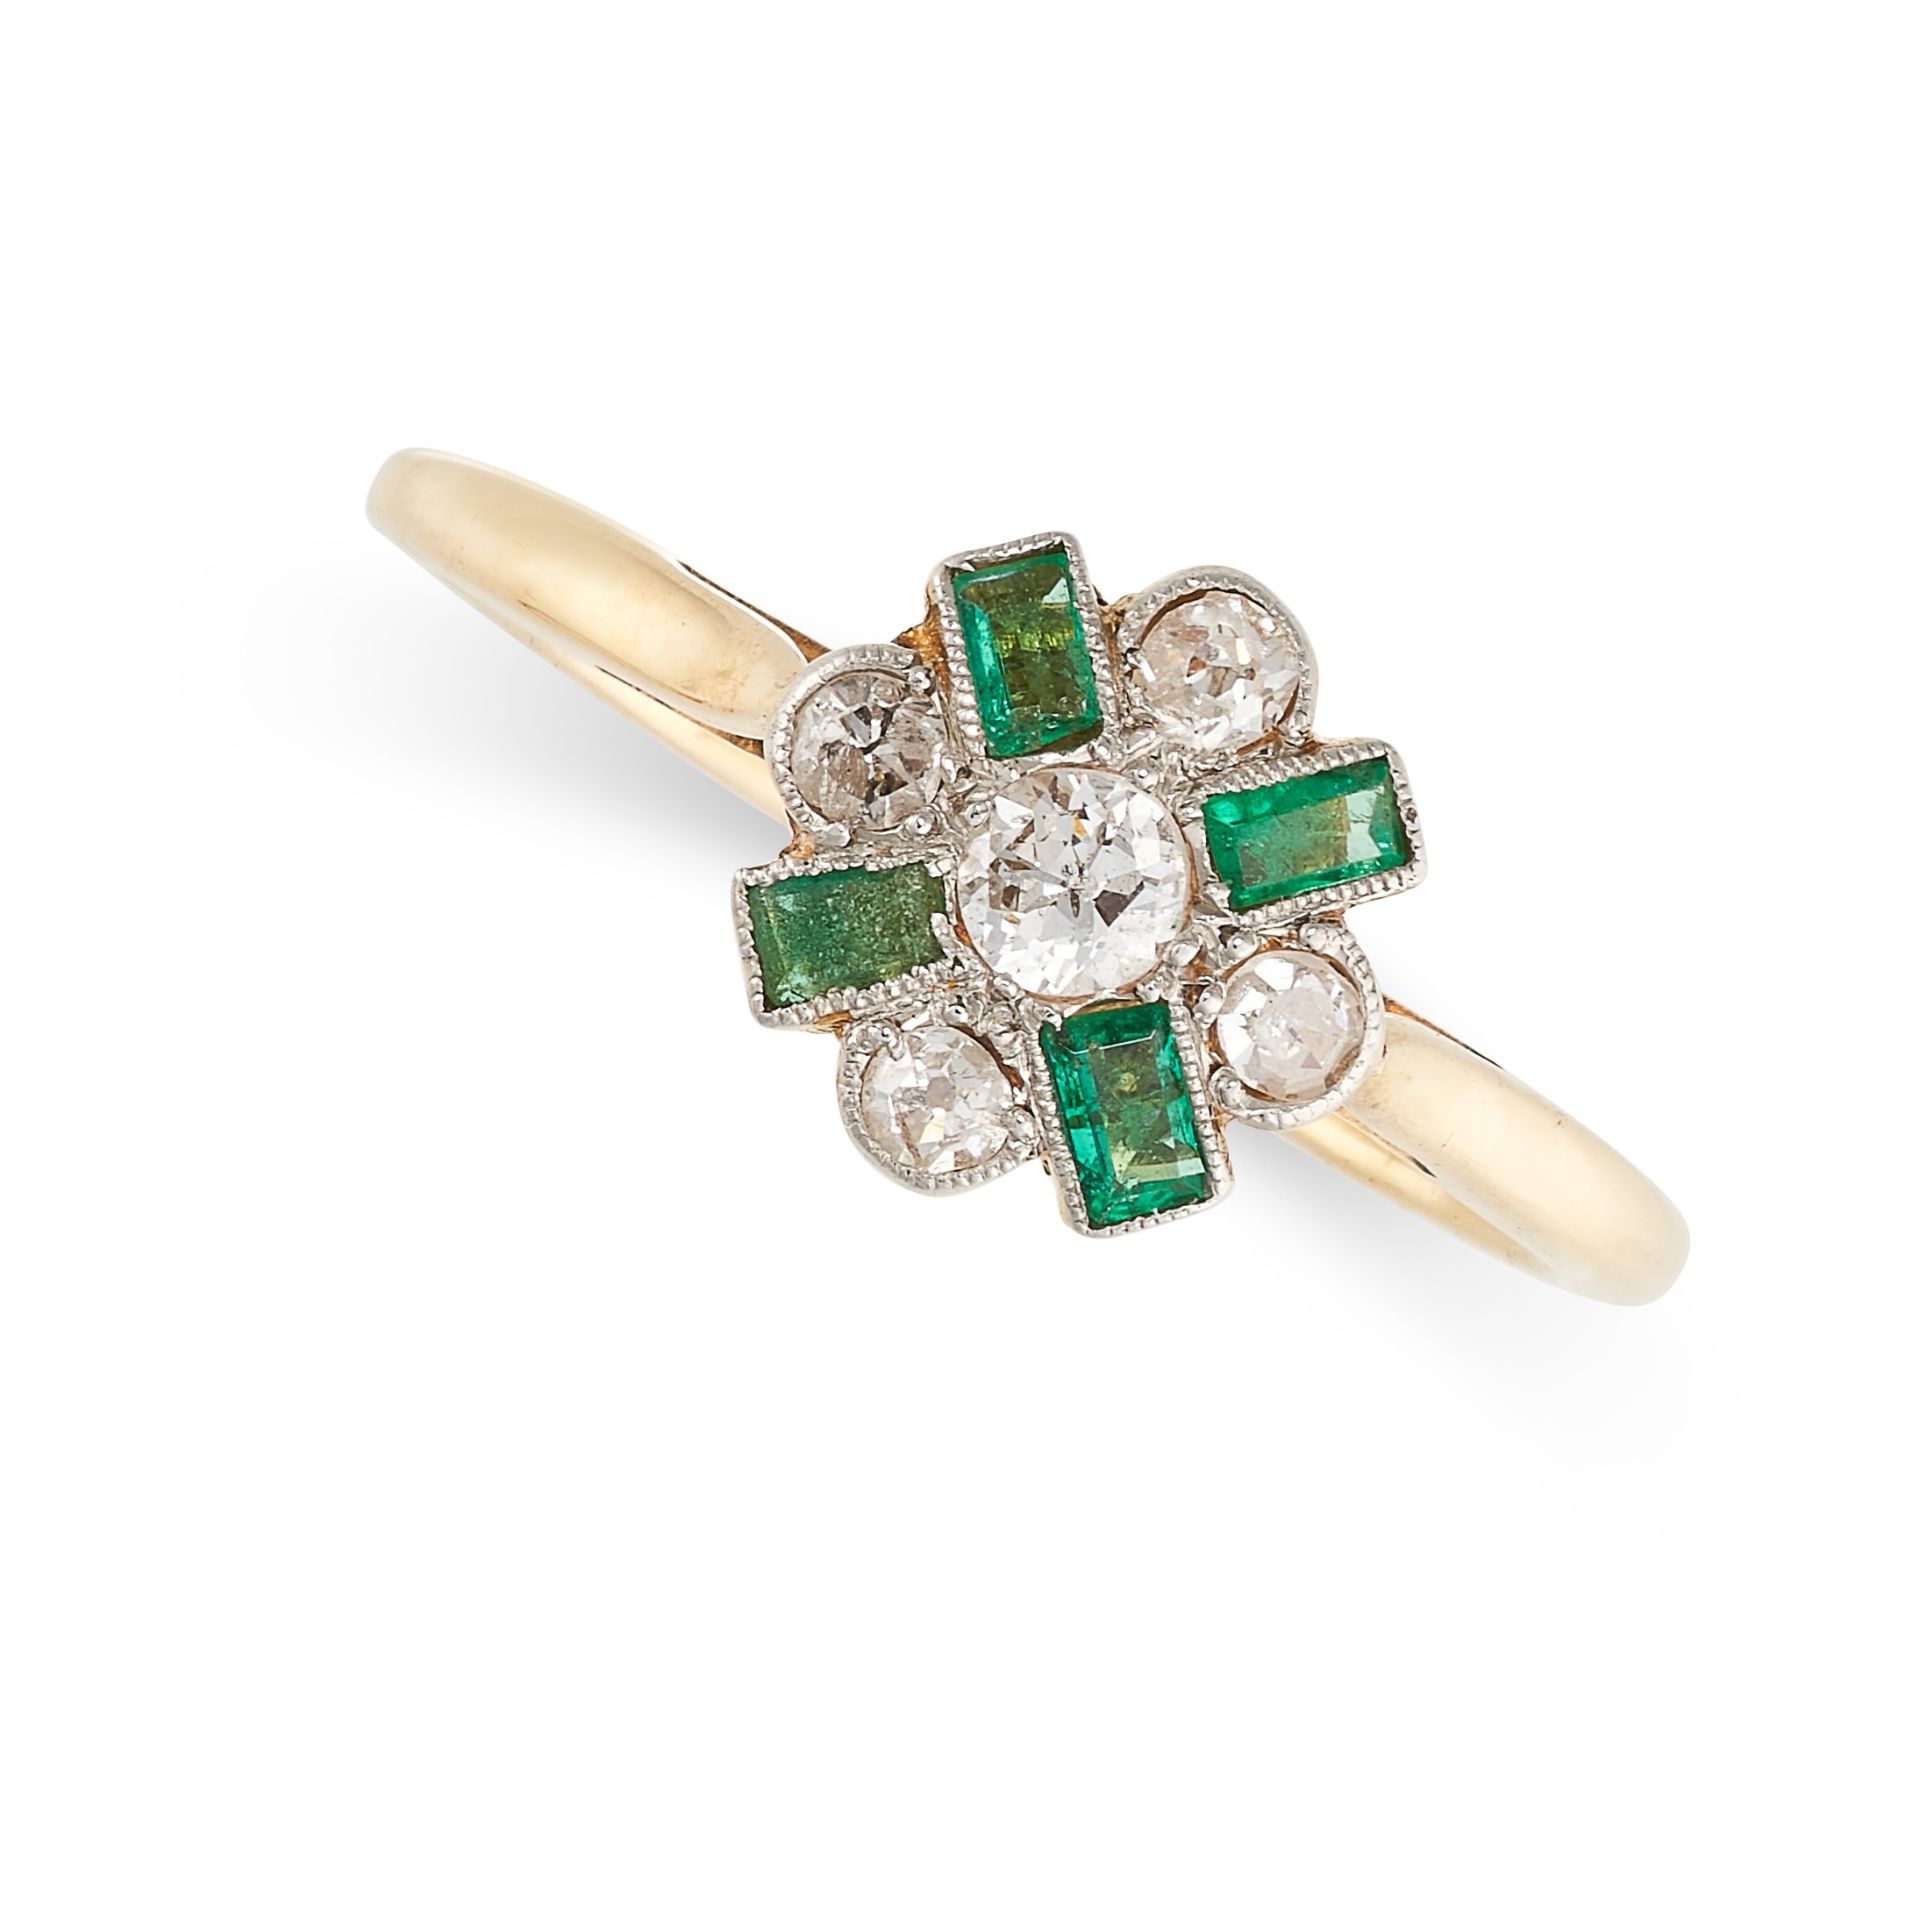 NO RESERVE - AN ART DECO DIAMOND AND EMERALD RING in 18ct yellow gold and platinum, set with a